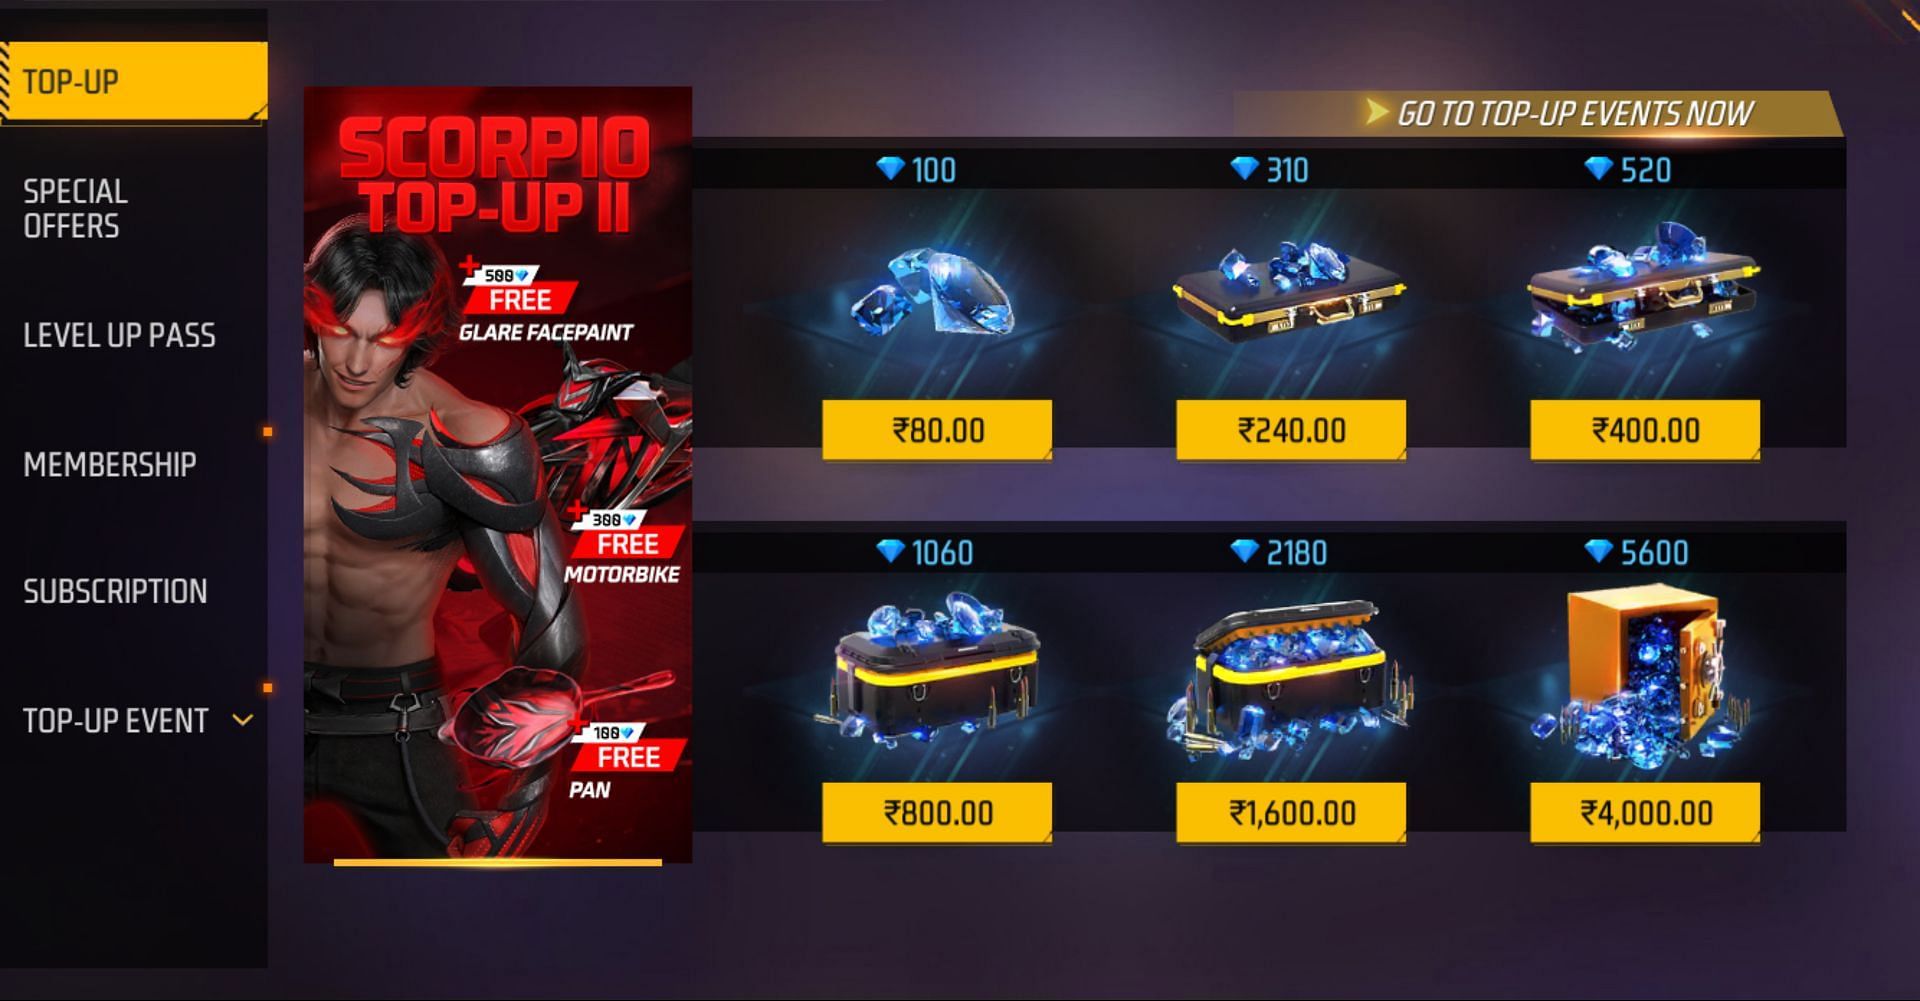 You can complete the process by using the in-game currency (Image via Garena)